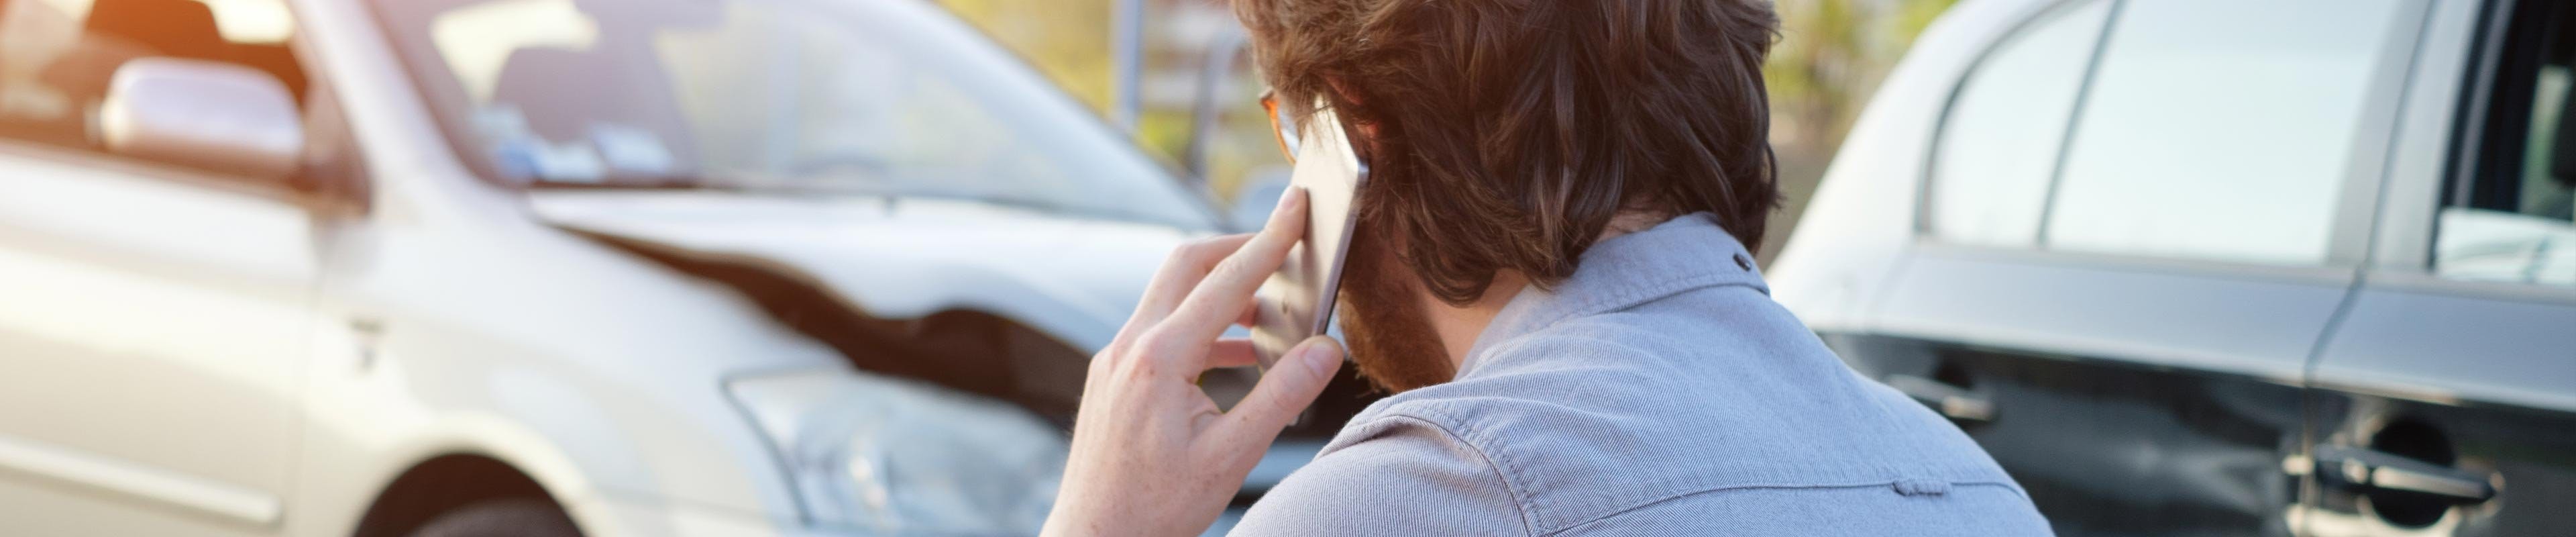 Man on cellphone calling about insurance after an accident